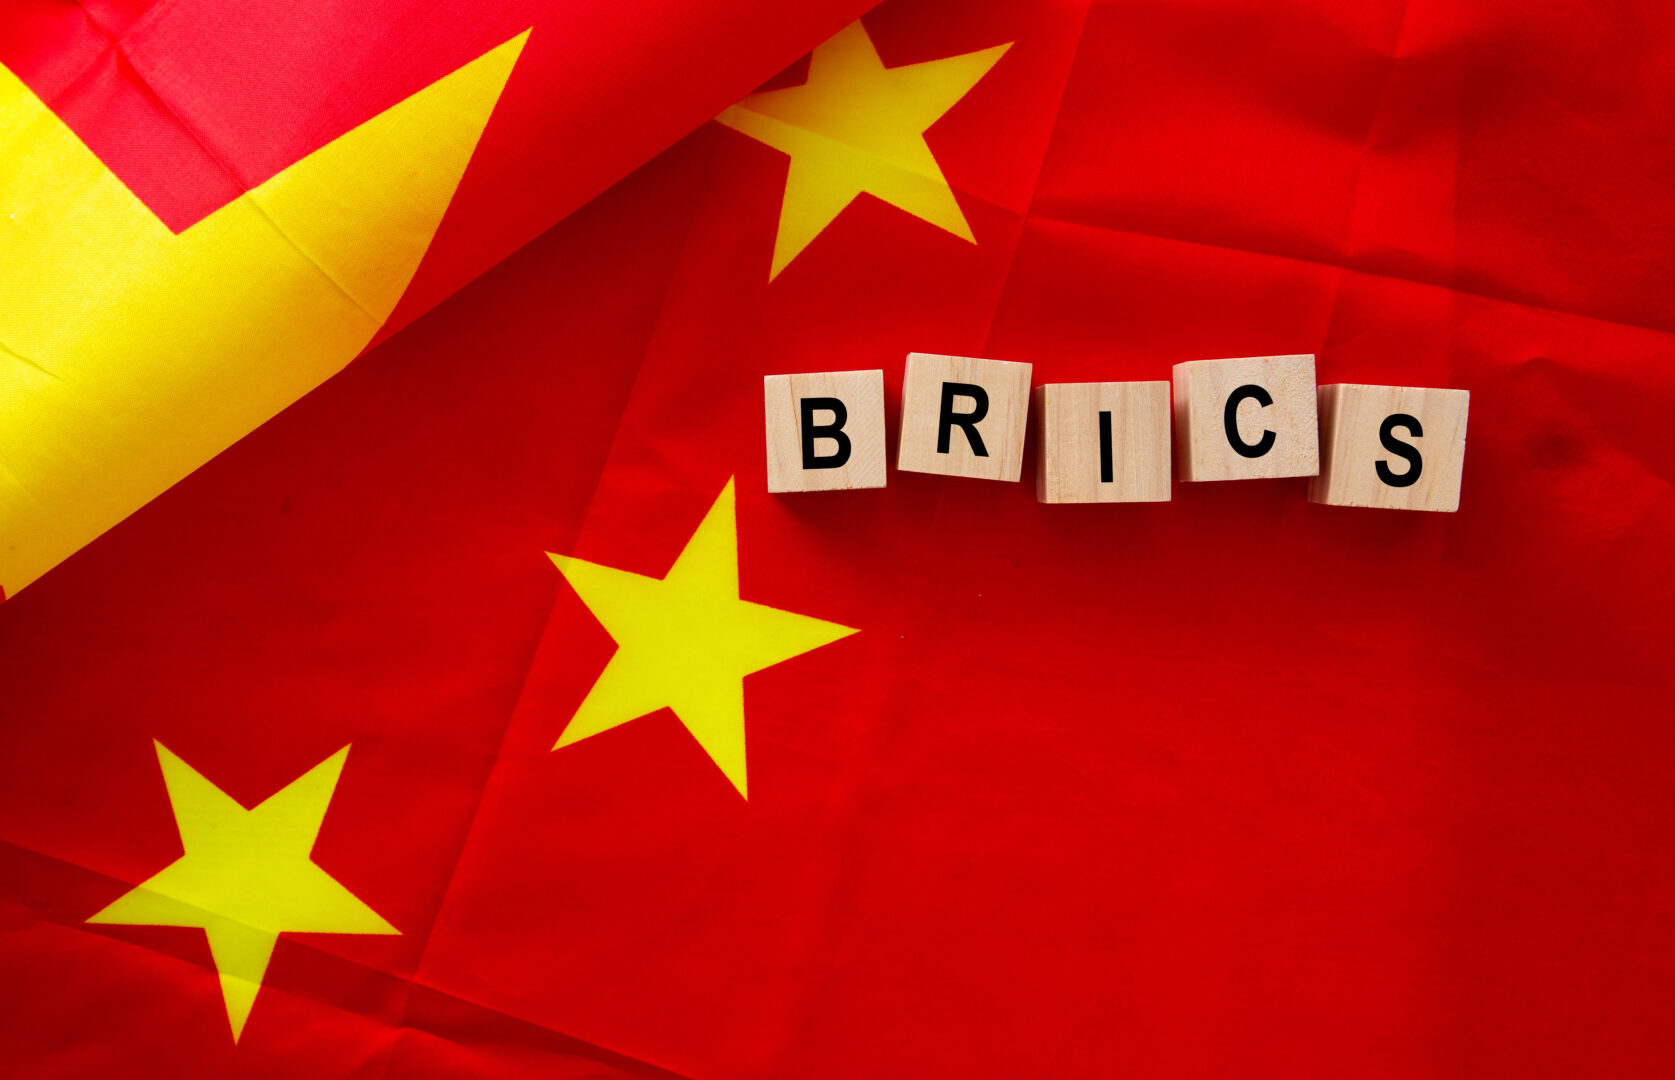 Wooden letter blocks spelling "Brics Alliance" on a red surface with a partial view of the Chinese flag visible.